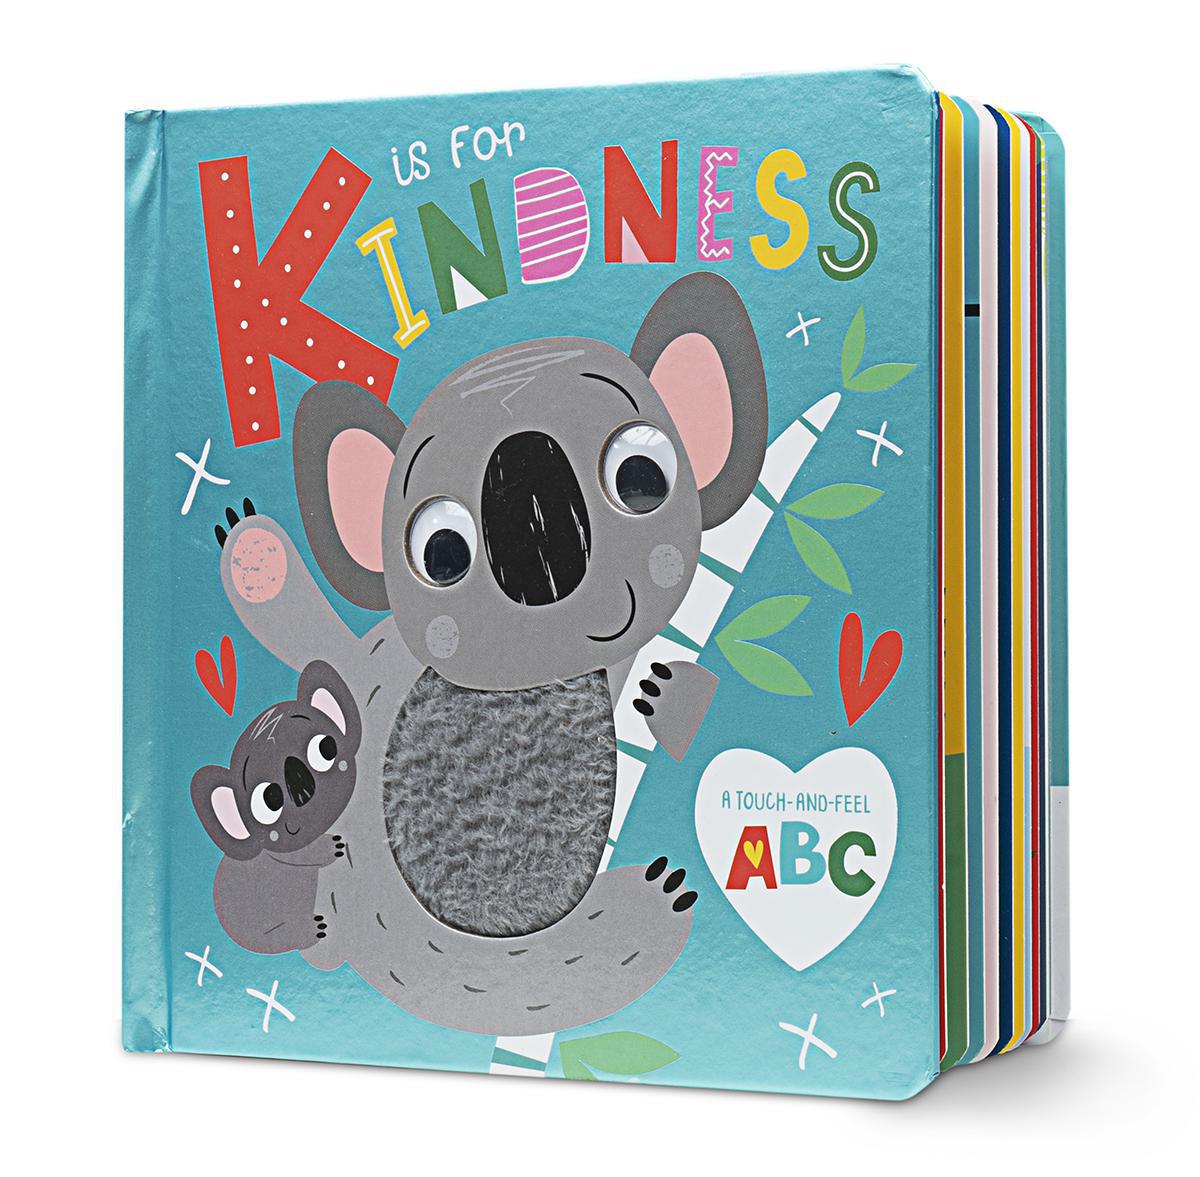  K Is for Kindness 